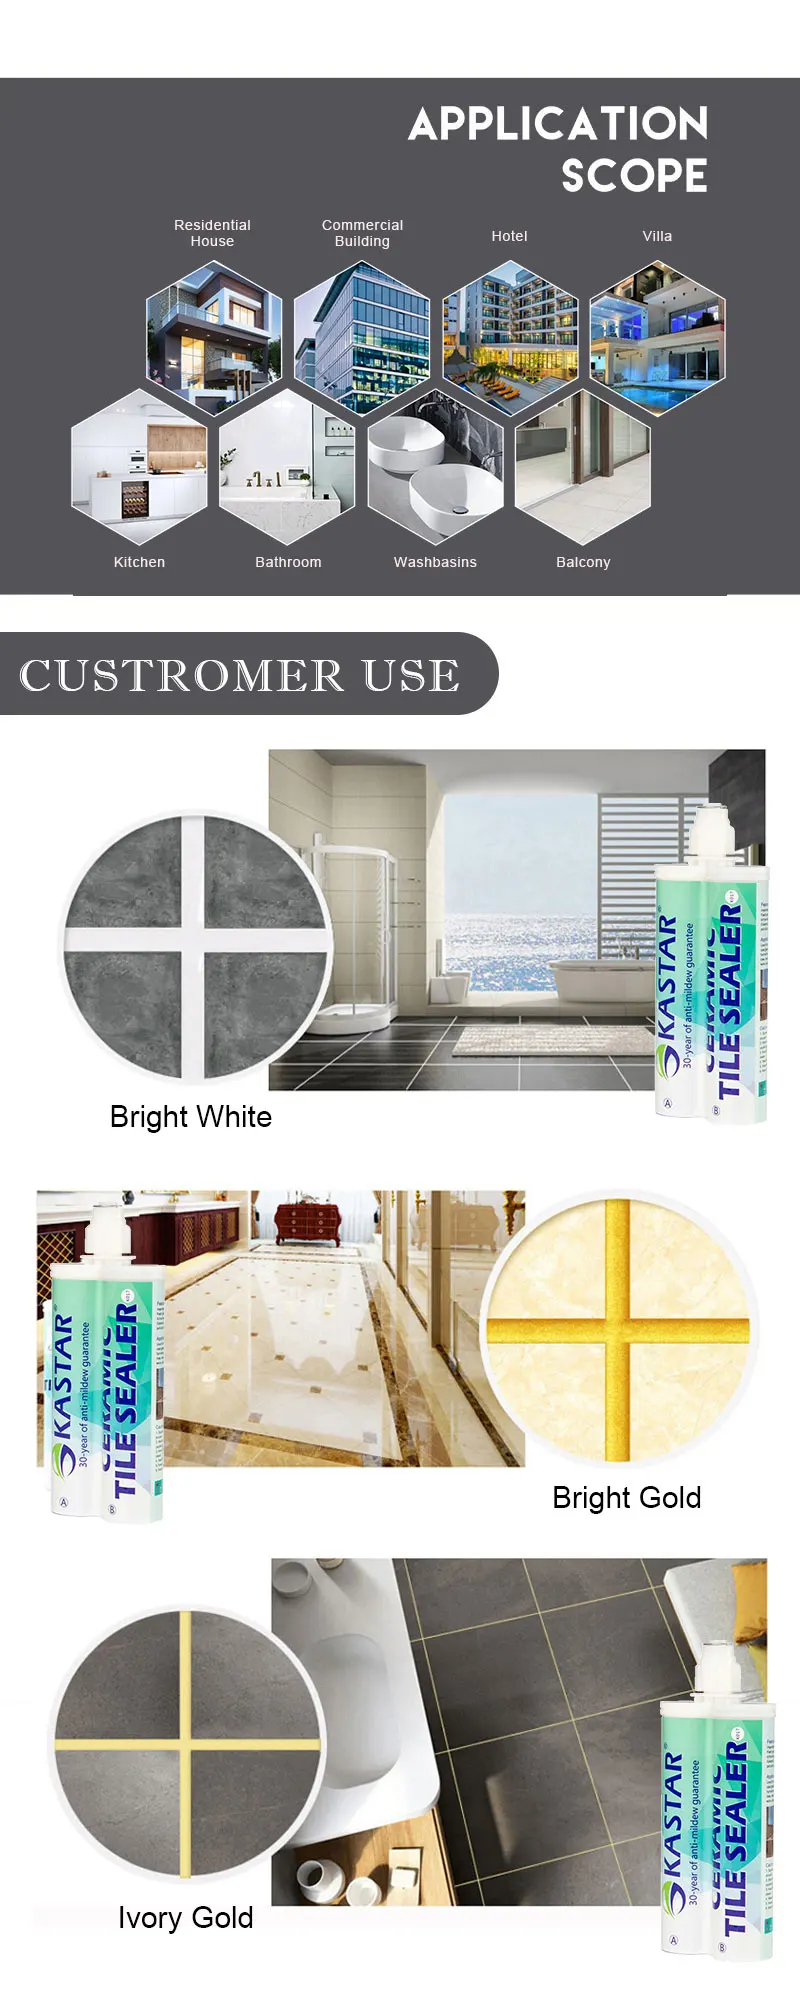 Easy Use Double-Part Water Tight Anti-Aging Tile Mortar Adhesive For Bathroom And Kitchen Remodeling